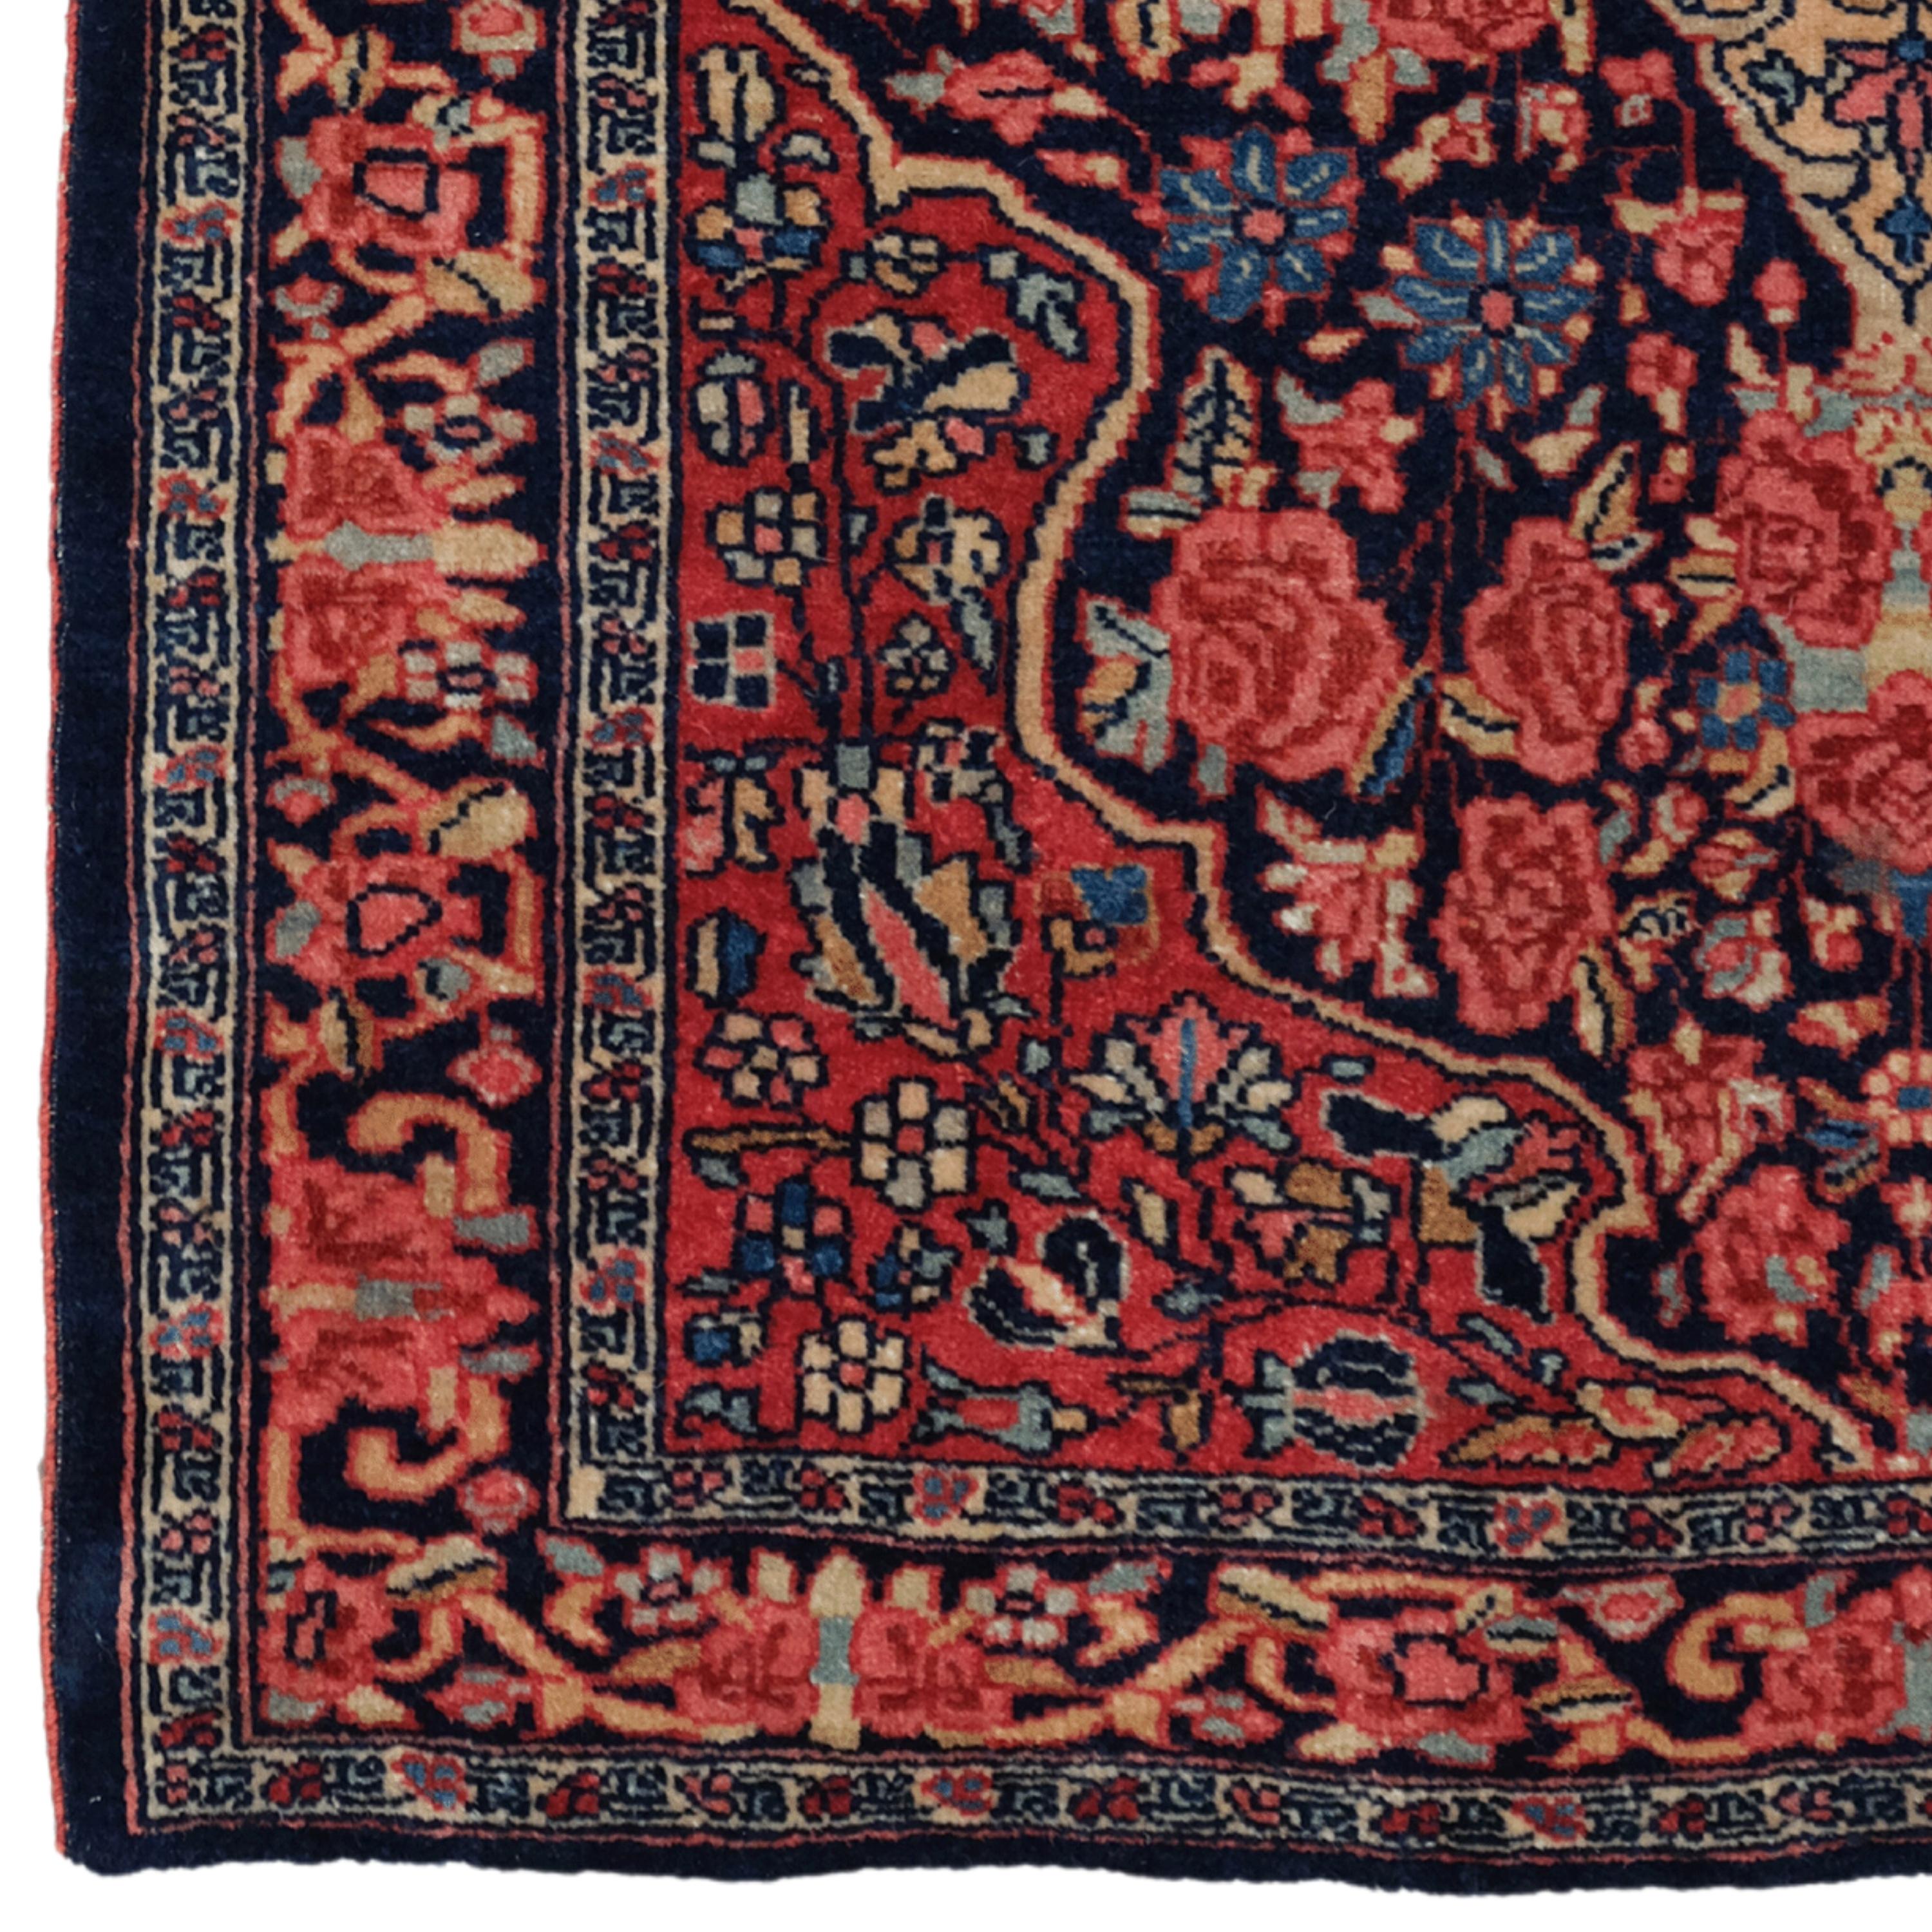 Sarouk Bag Face
19th Century Sarouk Bag Face
Size: 75×79 cm  2,46x2,59 In

This extraordinary carpet will fascinate you with its intricate designs and vibrant colors that reflect the rich history and craftsmanship of the period. Each stitch tells